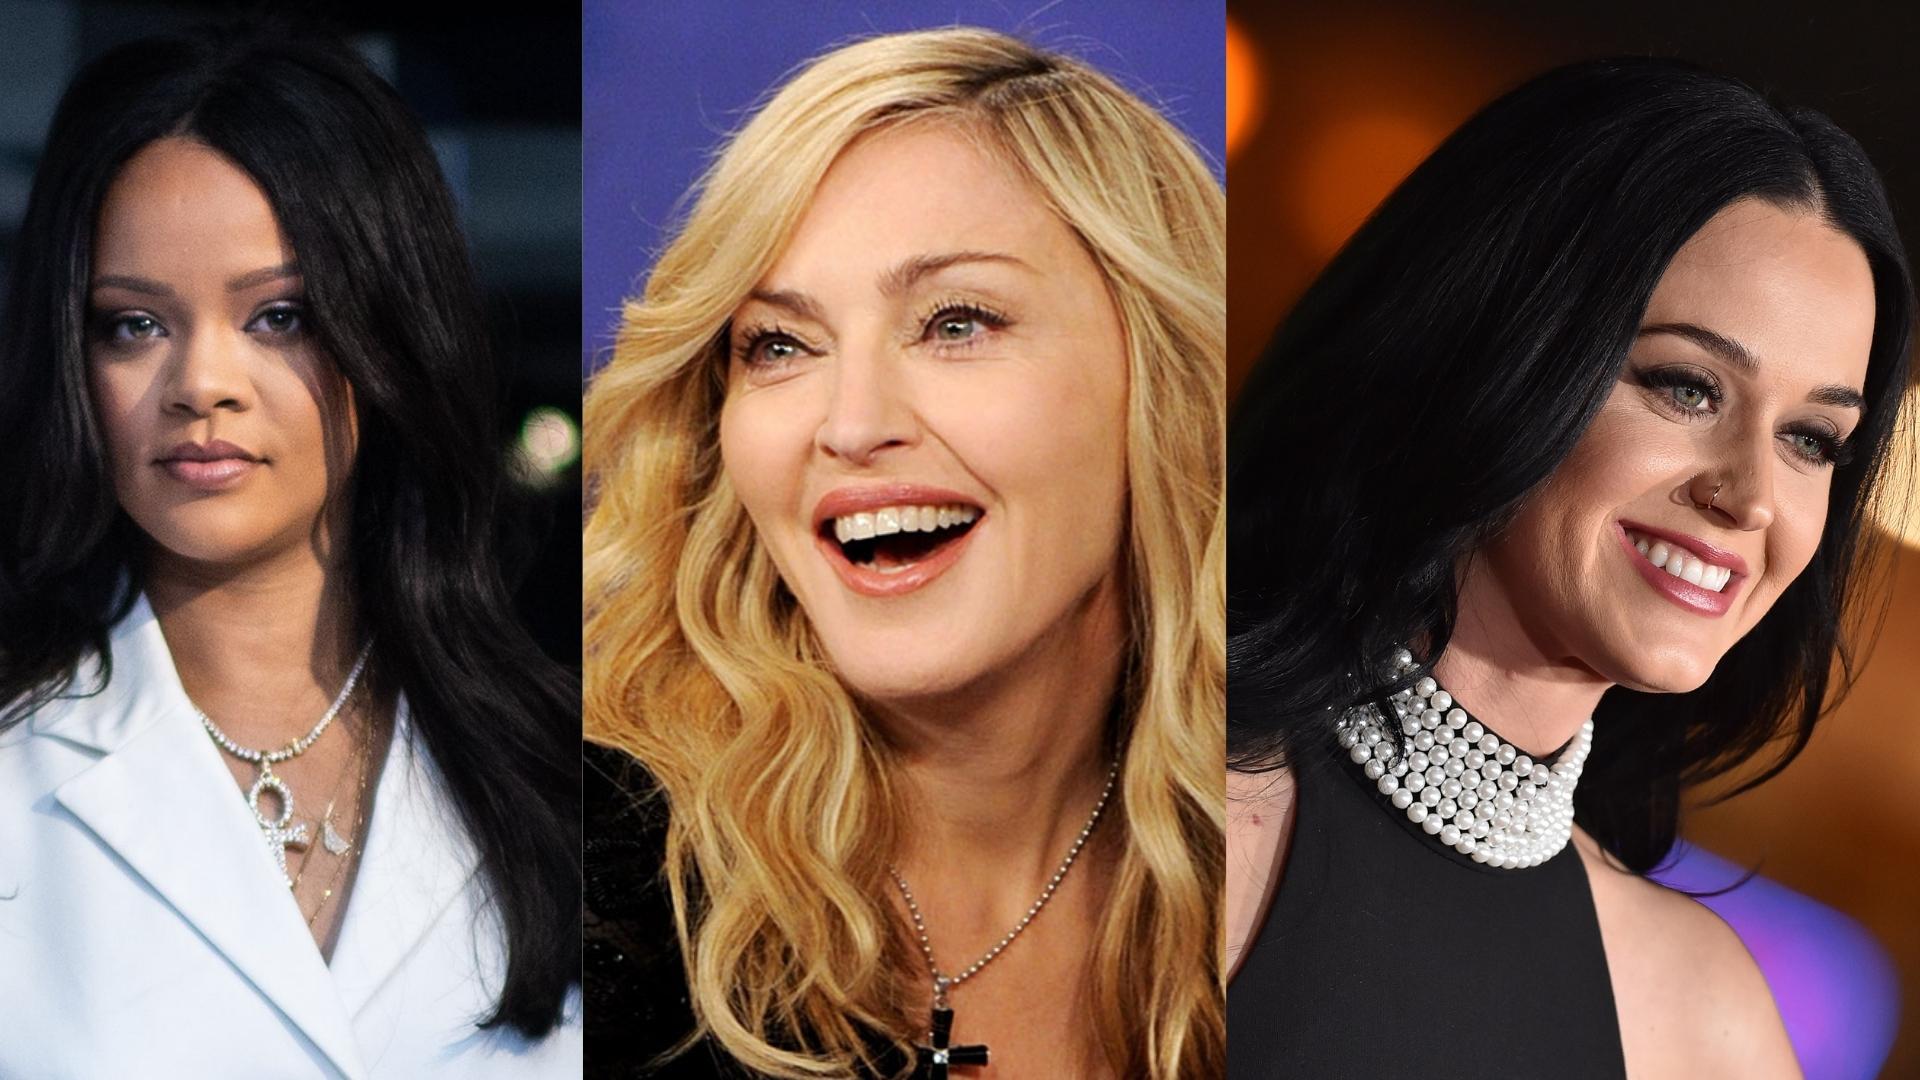 Facts about Rihanna, Madonna and Katy Perry